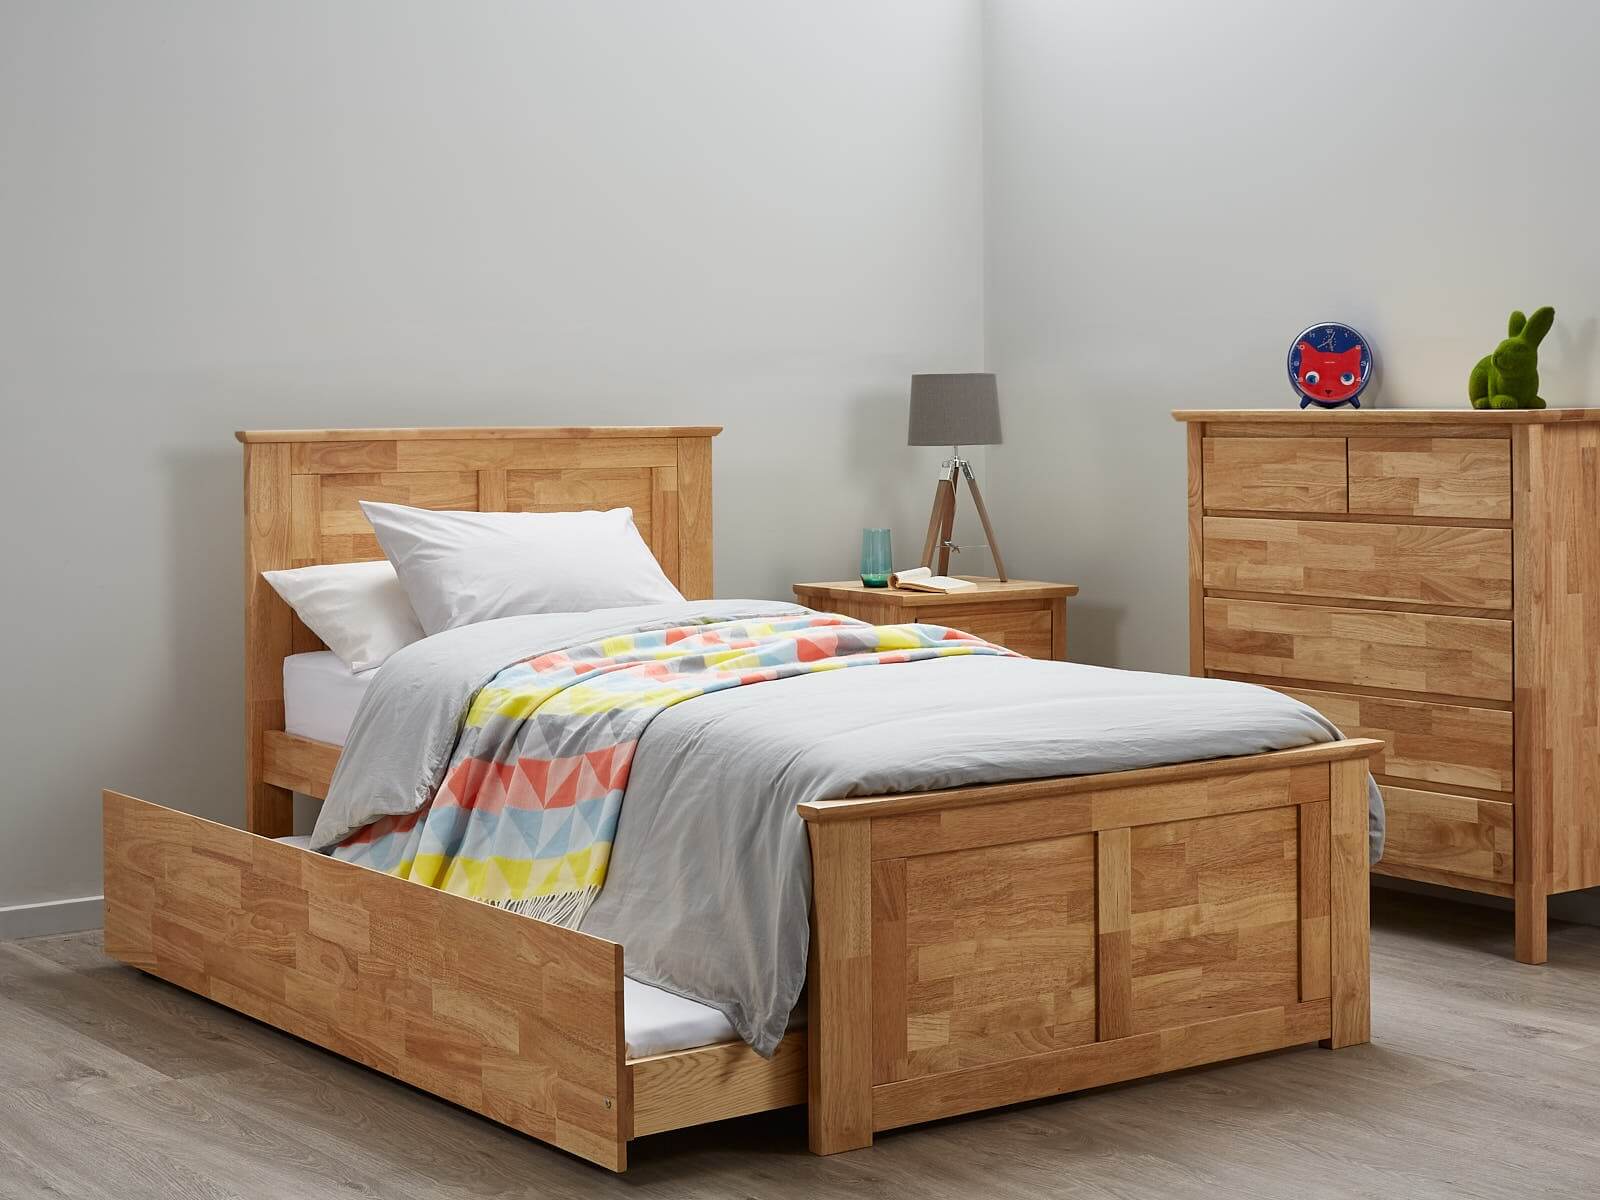 15 Amazing DIY Bed Frame Designs – Because Comfort Matters